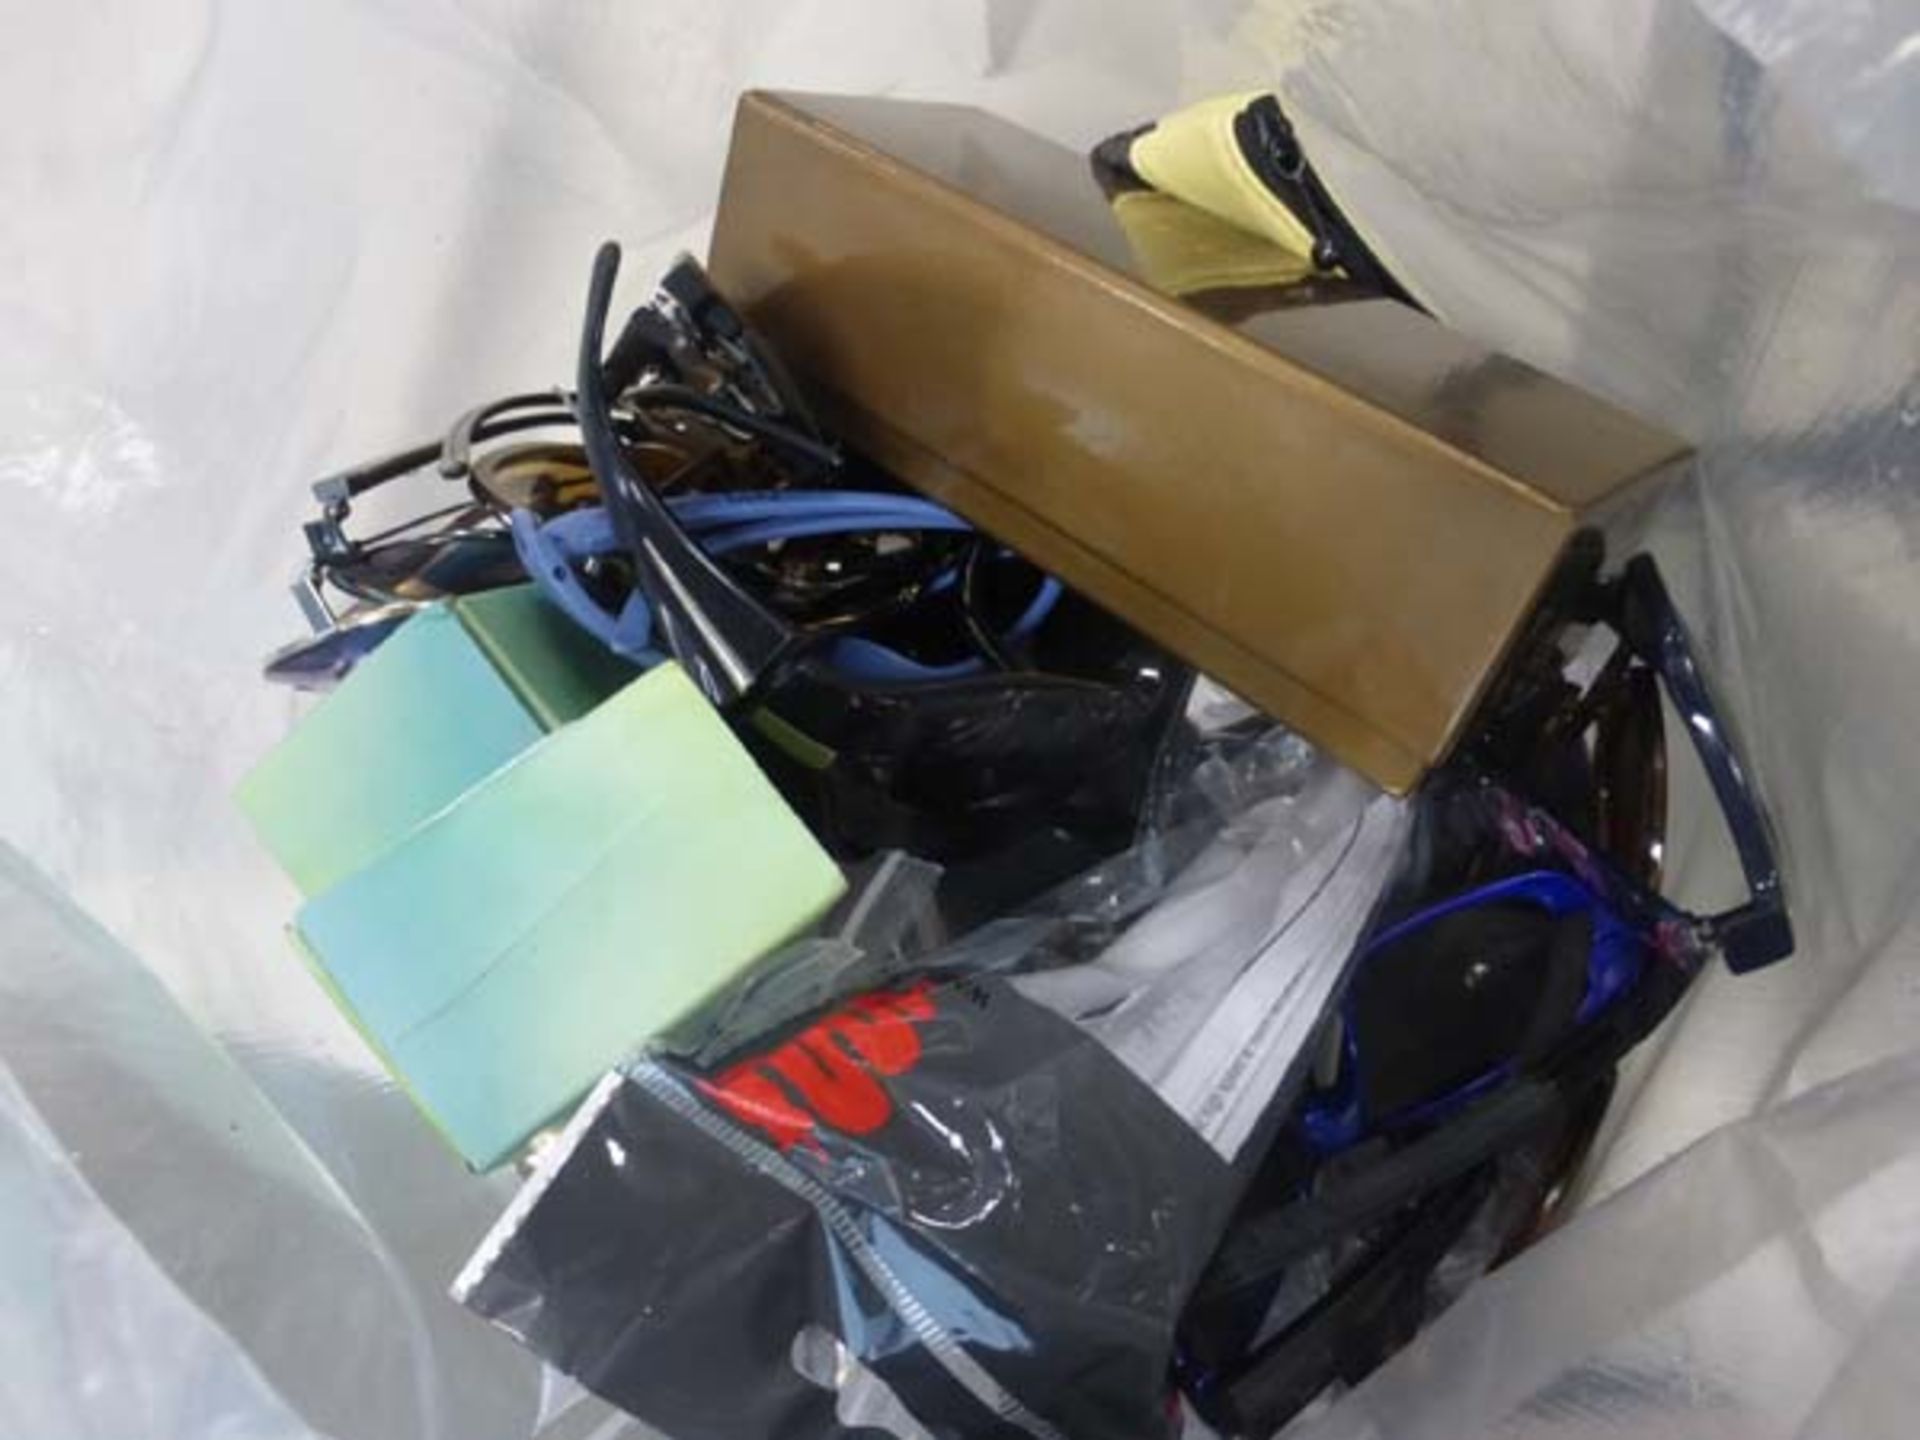 Bag containing various loose sunglasses cases and glasses, some damaged